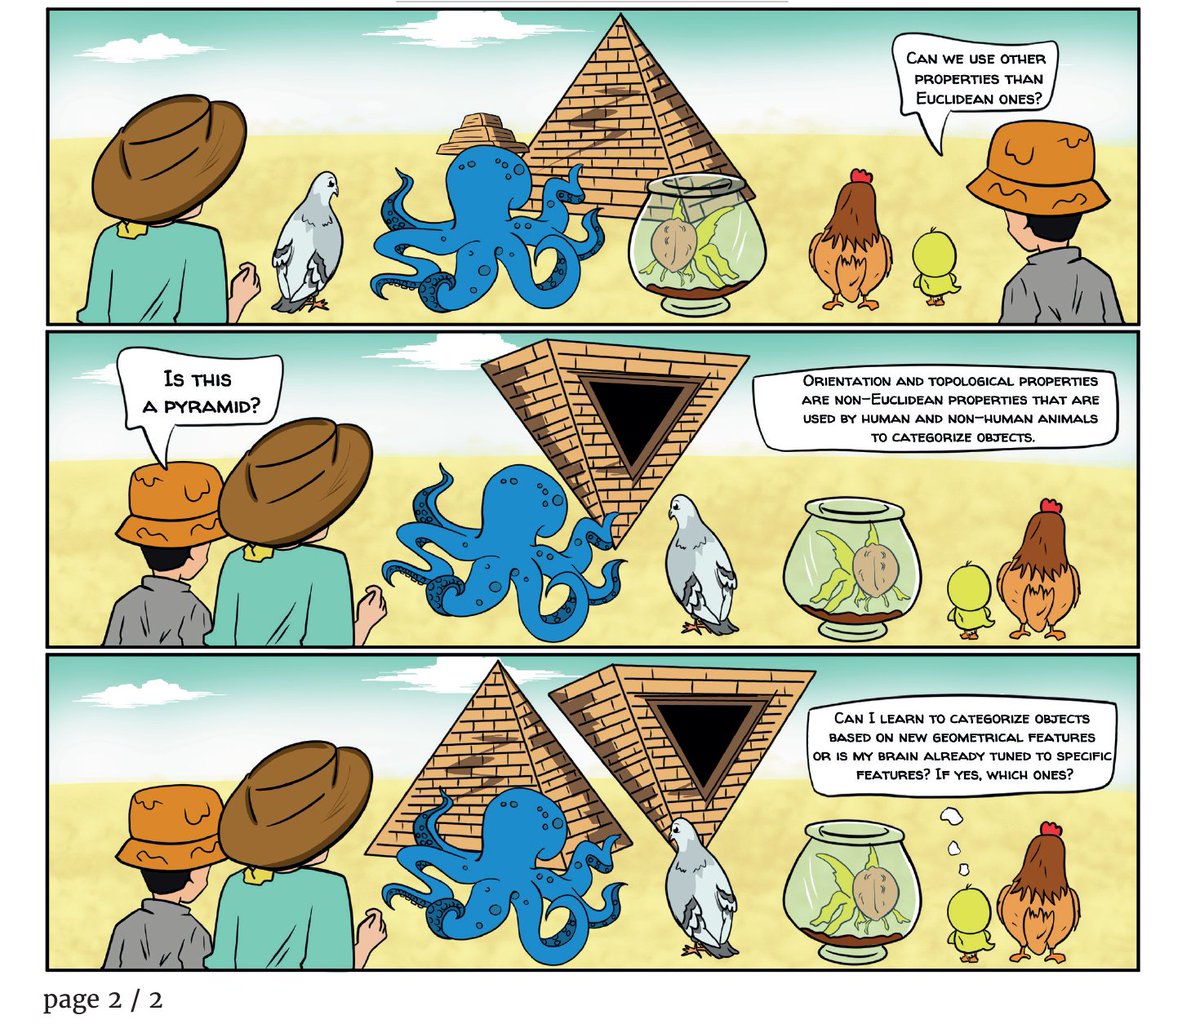 Dive into @PlaciSarah review and explore the geometrical properties used by animals to recognize and categorize objects.
doi.org/10.52732/XLYA4…
#openscience #AcademicTwitter #science 
PS/ Do you want more science comic strips?